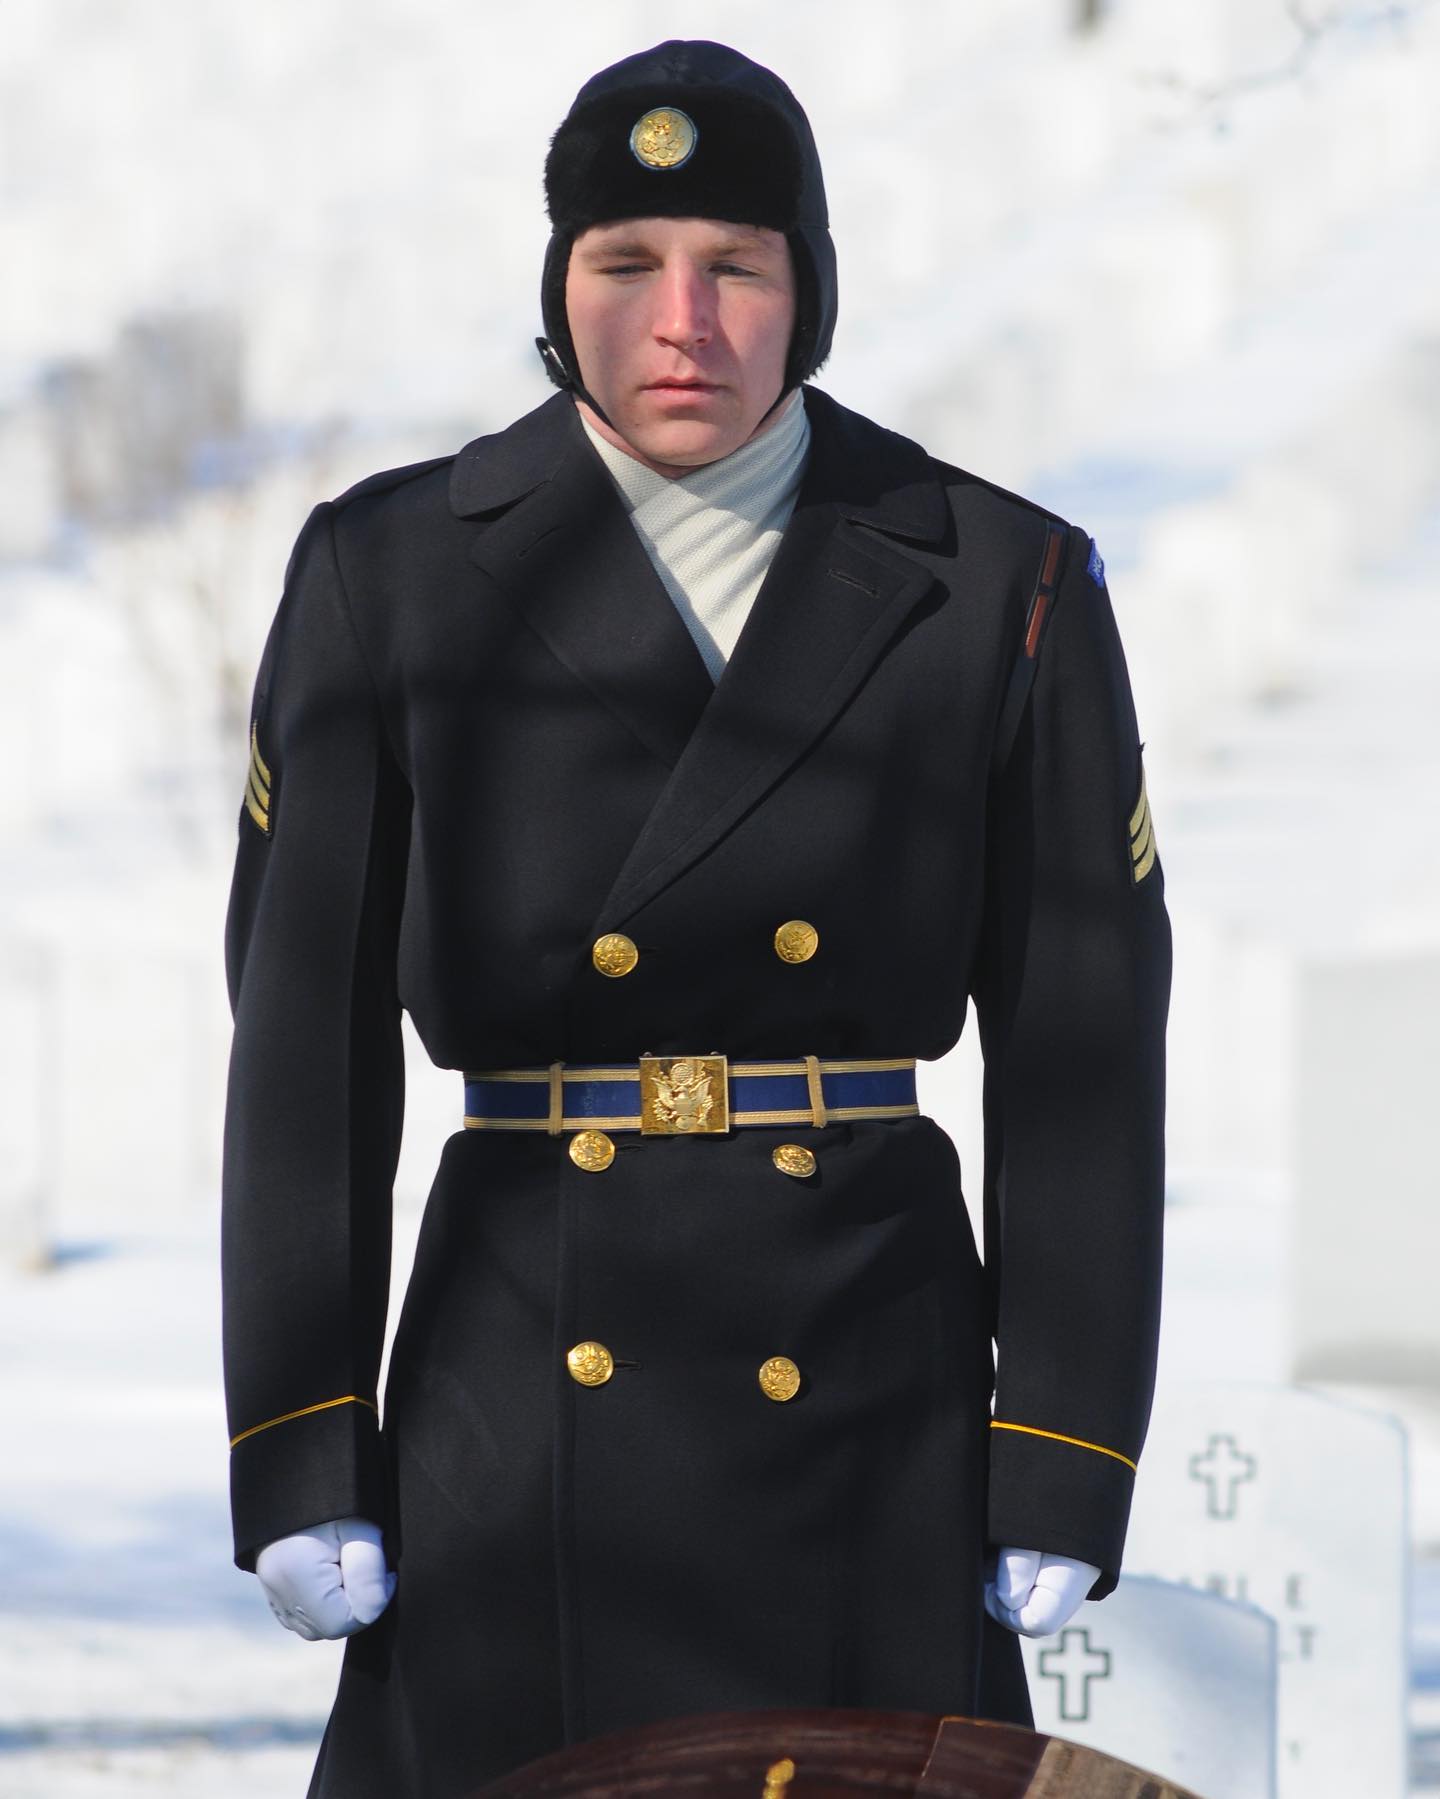 Pictured above, a soldier in “The Old Guard”, honors a fallen veteran at Arlington National Cemetery. 

The 3d U.S. Infantry, traditionally known as "The Old Guard," is the oldest active-duty infantry unit in the Army, serving our nation since 1784.

The Old Guard is the Army's official ceremonial unit and escort to the president, and it also provides security for Washington, D.C., in time of national emergency or civil disturbance.

The unit received its unique name from Gen. Winfield Scott during a victory parade at Mexico City in 1847 following its valorous performance in the Mexican War. Fifty campaign streamers attest to the 3d Infantry's long history of service, which spans from the Battle of Fallen Timbers to World War II and Vietnam.

Since World War II, The Old Guard has served as the official Army Honor Guard and escort to the President. In that capacity, 3d Infantry soldiers are responsible for conducting military ceremonies at the White House, the Pentagon, national memorials and elsewhere in the nation's capital. In addition, soldiers of The Old Guard maintain a 24-hour vigil at the Tomb of the Unknowns, provide military funeral escorts at Arlington National Cemetery and participate in parades at Fort Myer and Fort Lesley J. McNair.

The black-and-tan "buff strap" worn on the left shoulder by each member of the 3d Infantry is a replica of the knapsack strap used by 19th-century predecessors of the unit to display its distinctive colors and distinguish its members from other Army units. The present buff strap continues to signify an Old Guard soldier's pride in personal appearance and precision performance that has marked the unit for 200 years.

A further distinction of The Old Guard is the time-honored custom of passing in-review with fixed bayonets at all parades. This practice, officially sanctioned by the War Department in 1922, dates to the Mexican War in 1847 when the 3d Infantry led a successful bayonet charge against the enemy at Cerro Gordo. Today, this distinction is still reserved for The Old Guard alone.